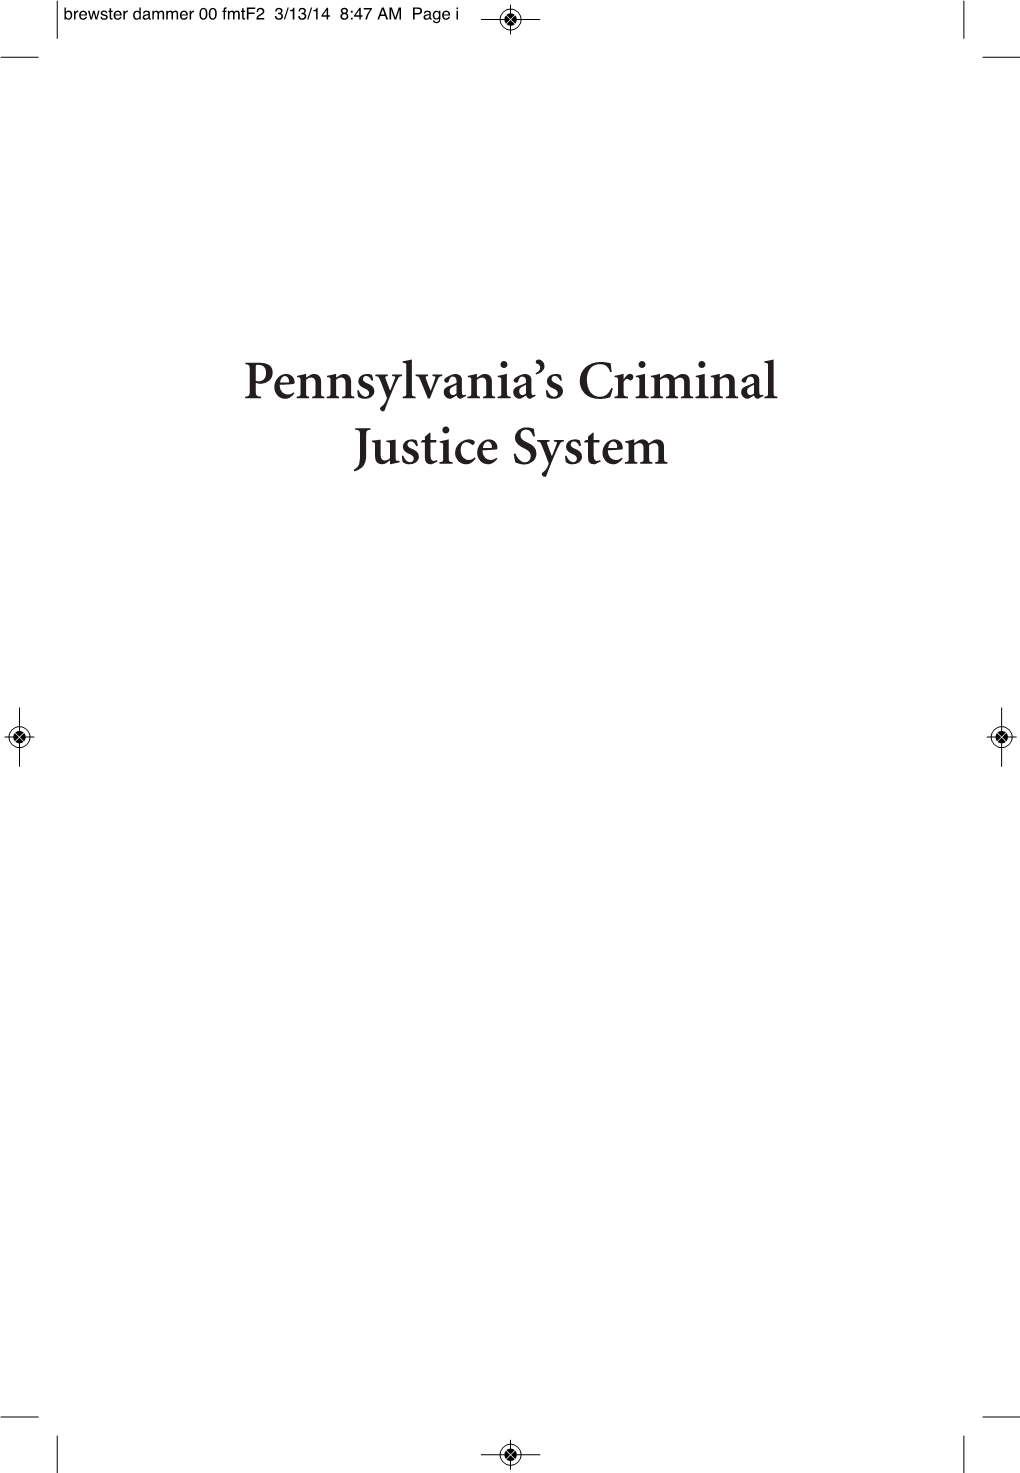 Pennsylvania's Criminal Justice System / Edited by Mary P